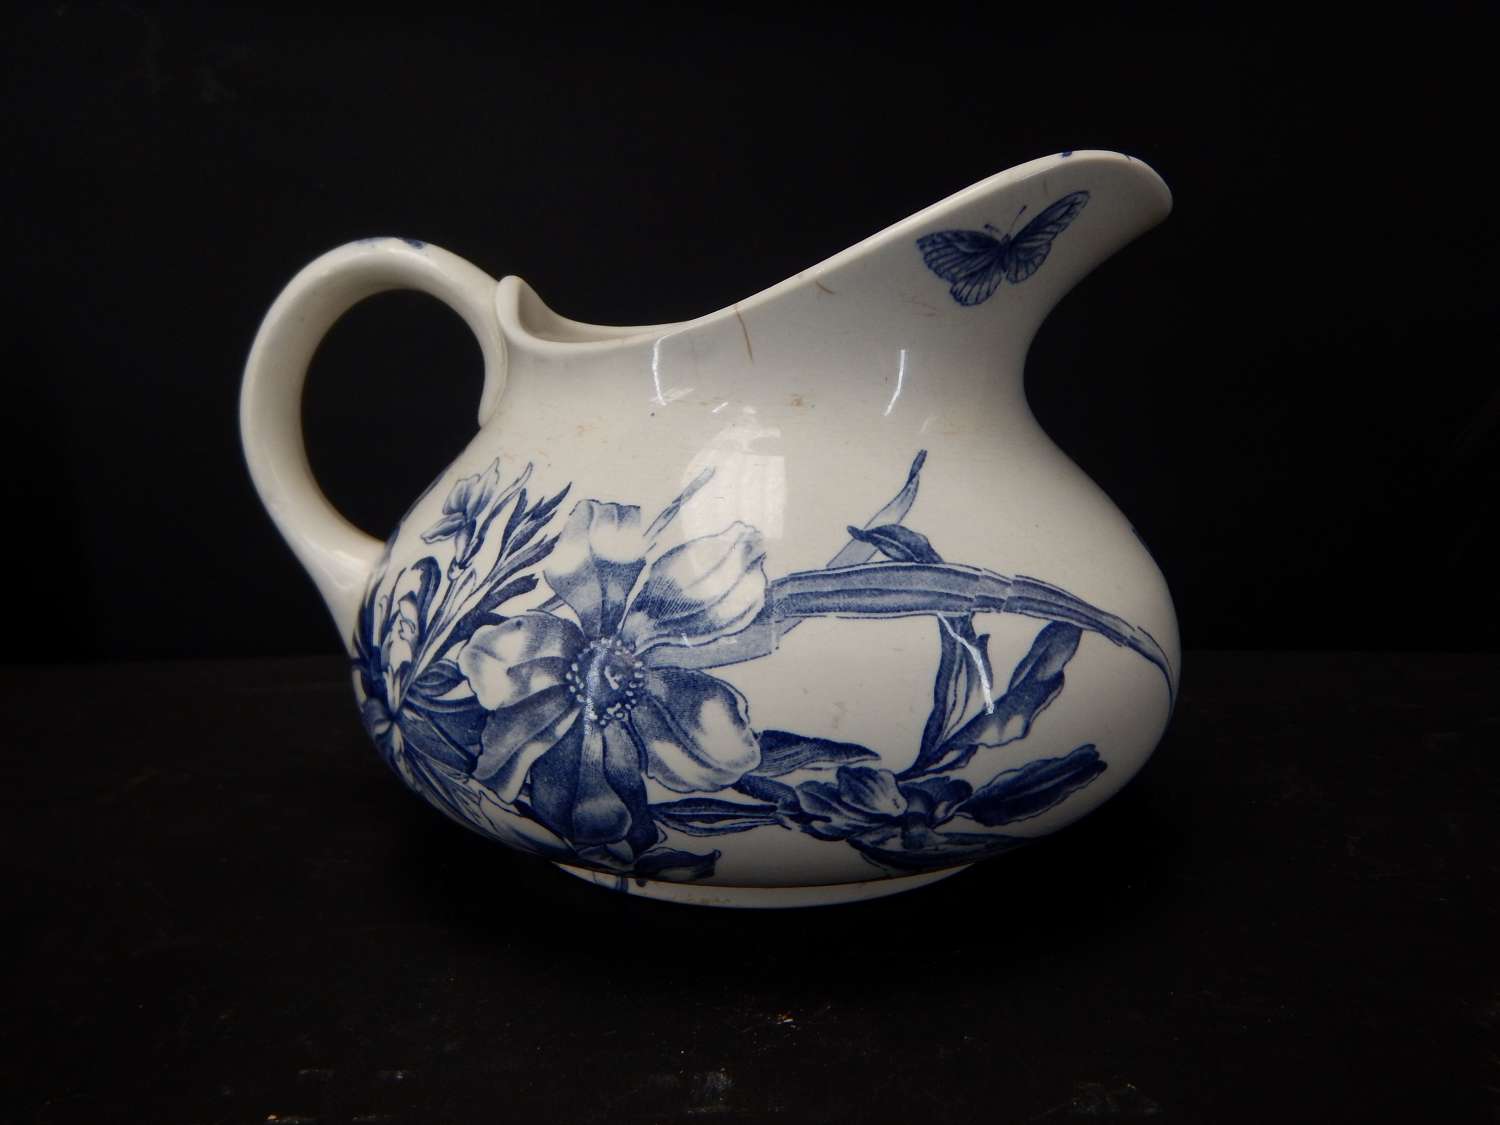 Antique French Anemone Jug / Pitcher - Late 1800's